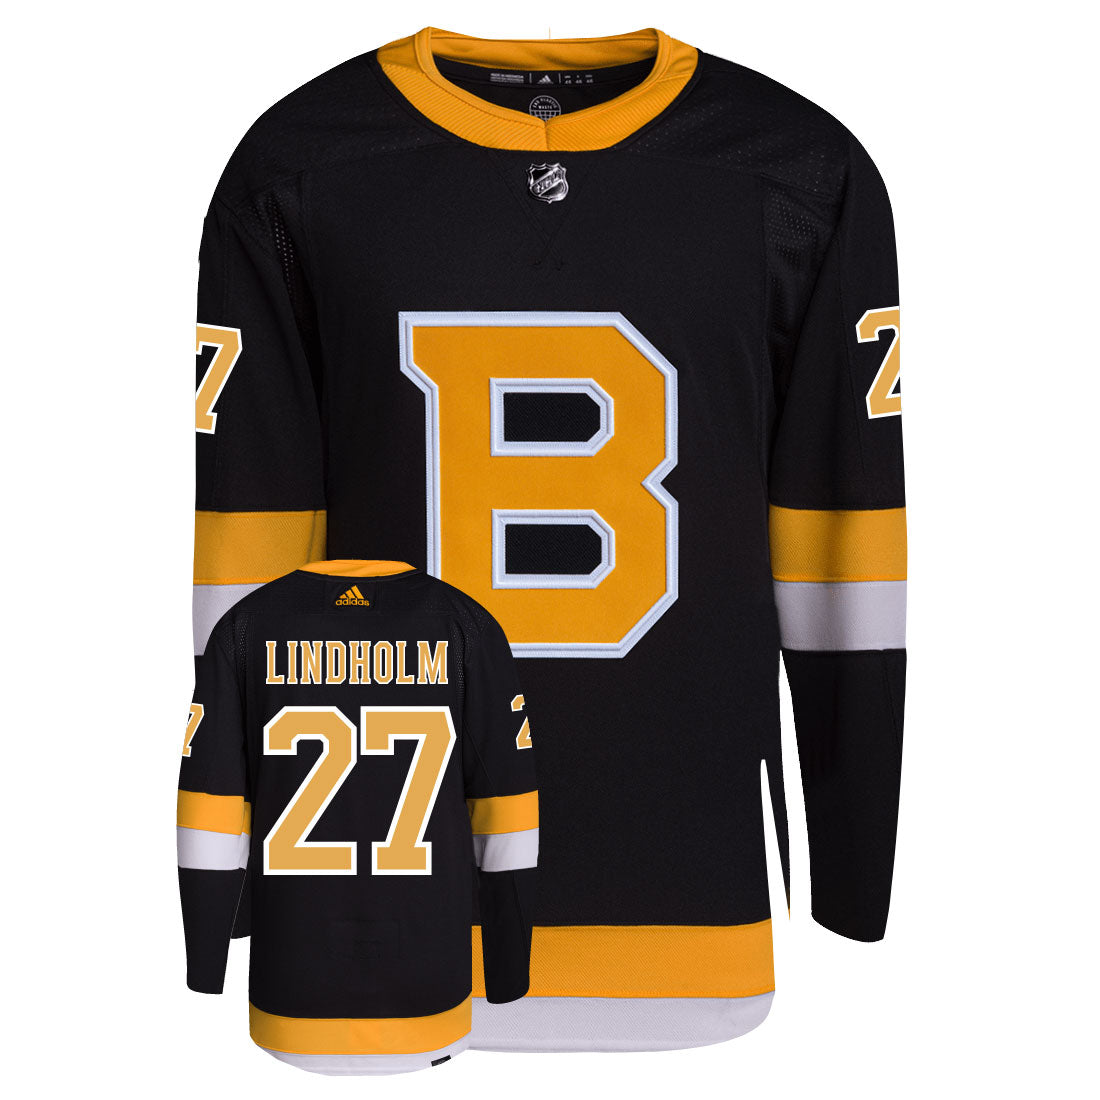 Hampus Lindholm Boston Bruins Adidas Primegreen Authentic Third Alternate NHL Hockey Jersey - Front/Back View